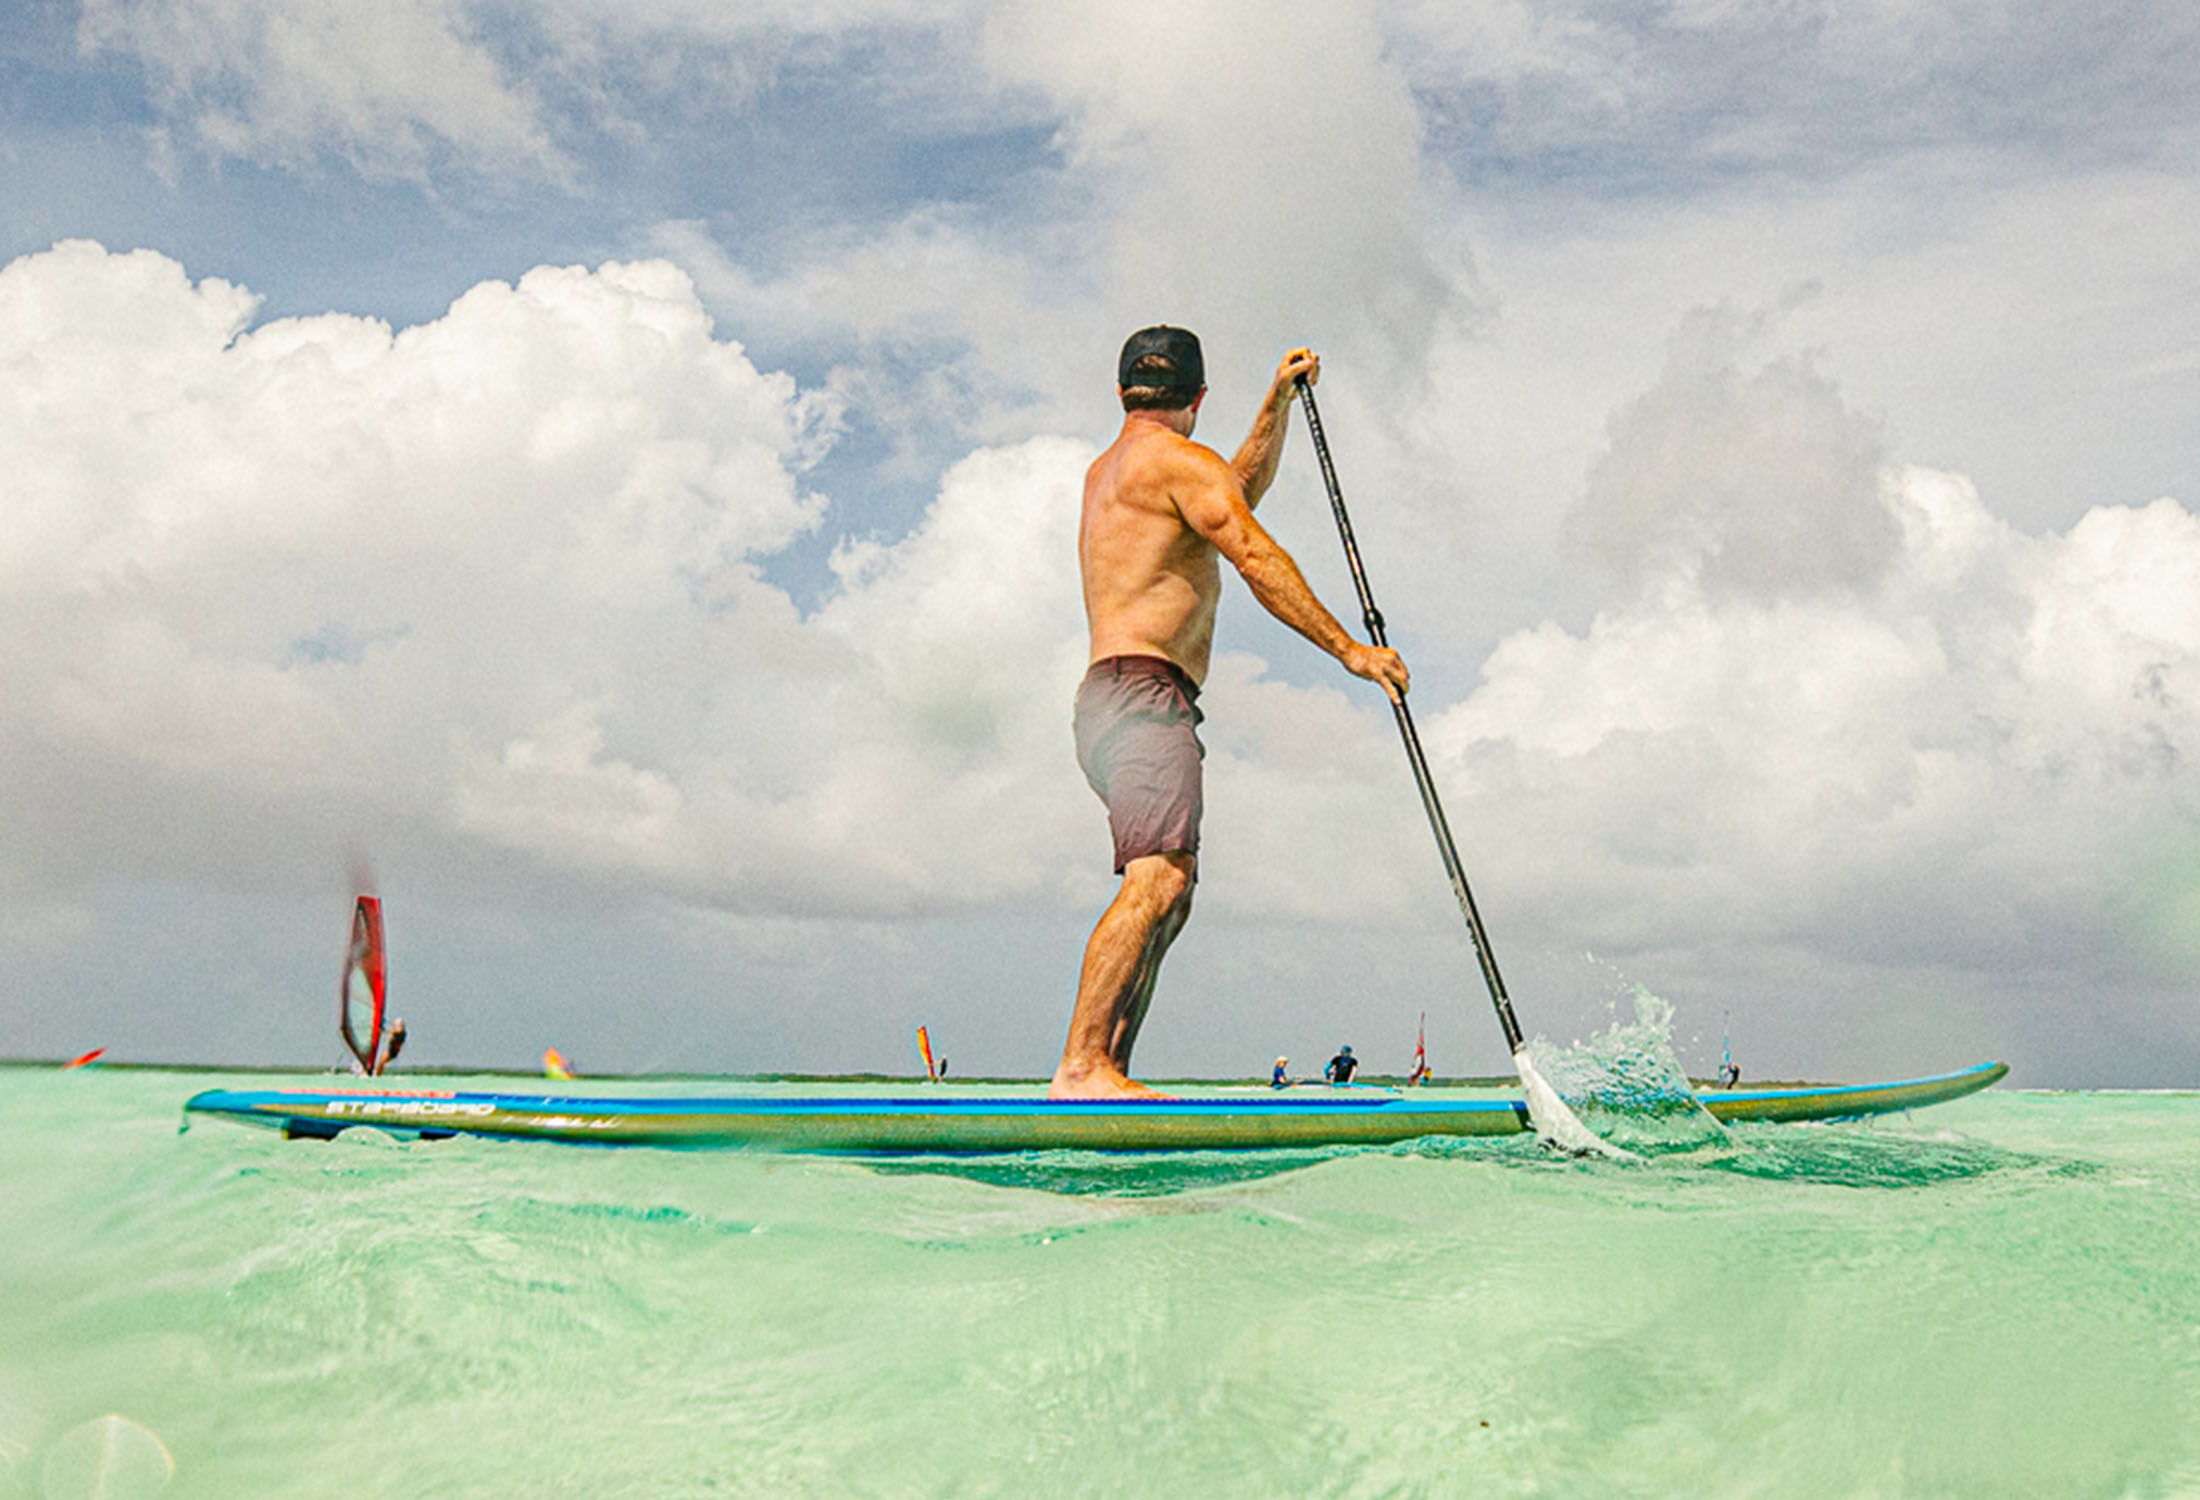 Man stand-up paddle boarding in the water